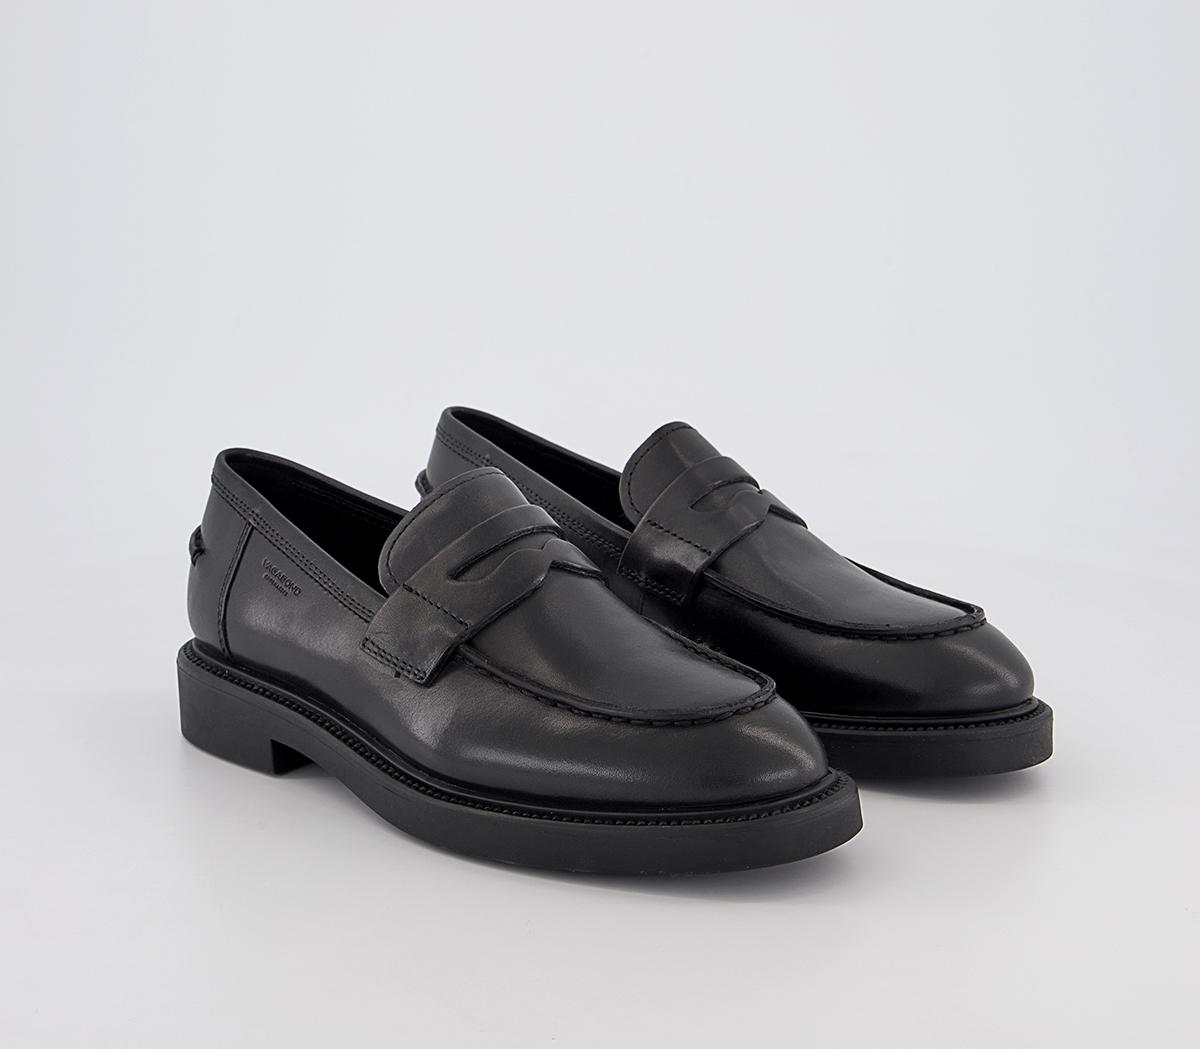 Vagabond Shoemakers Alex W Loafers Black Leather - Flat Shoes for Women